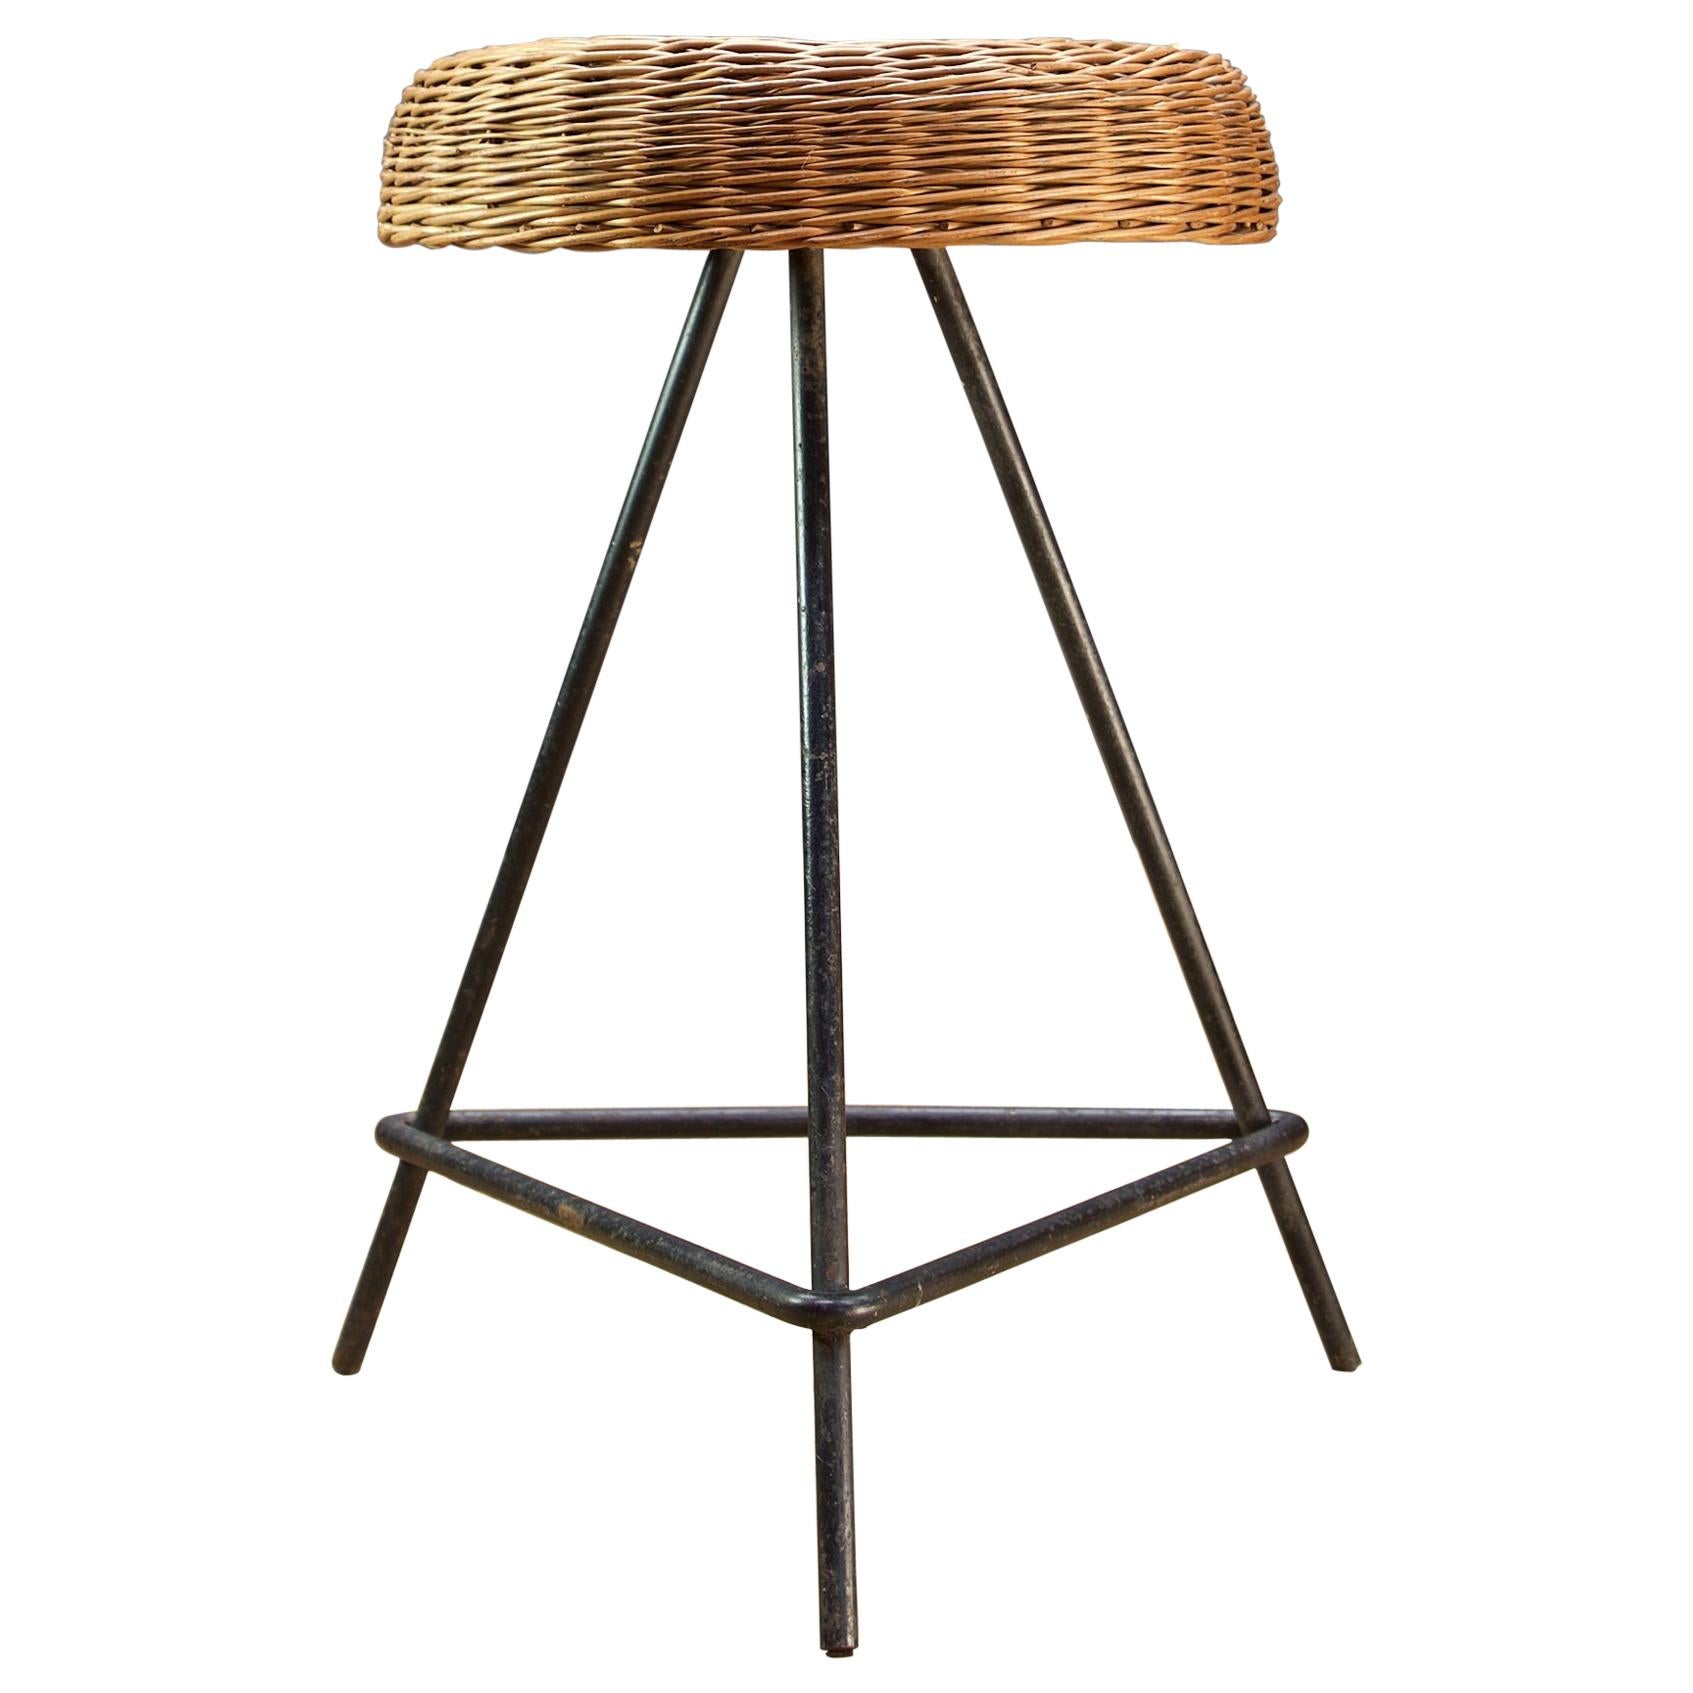 Cabin Modern Iron and Wicker Pedestal Stool Table Midcentury Decor Prop